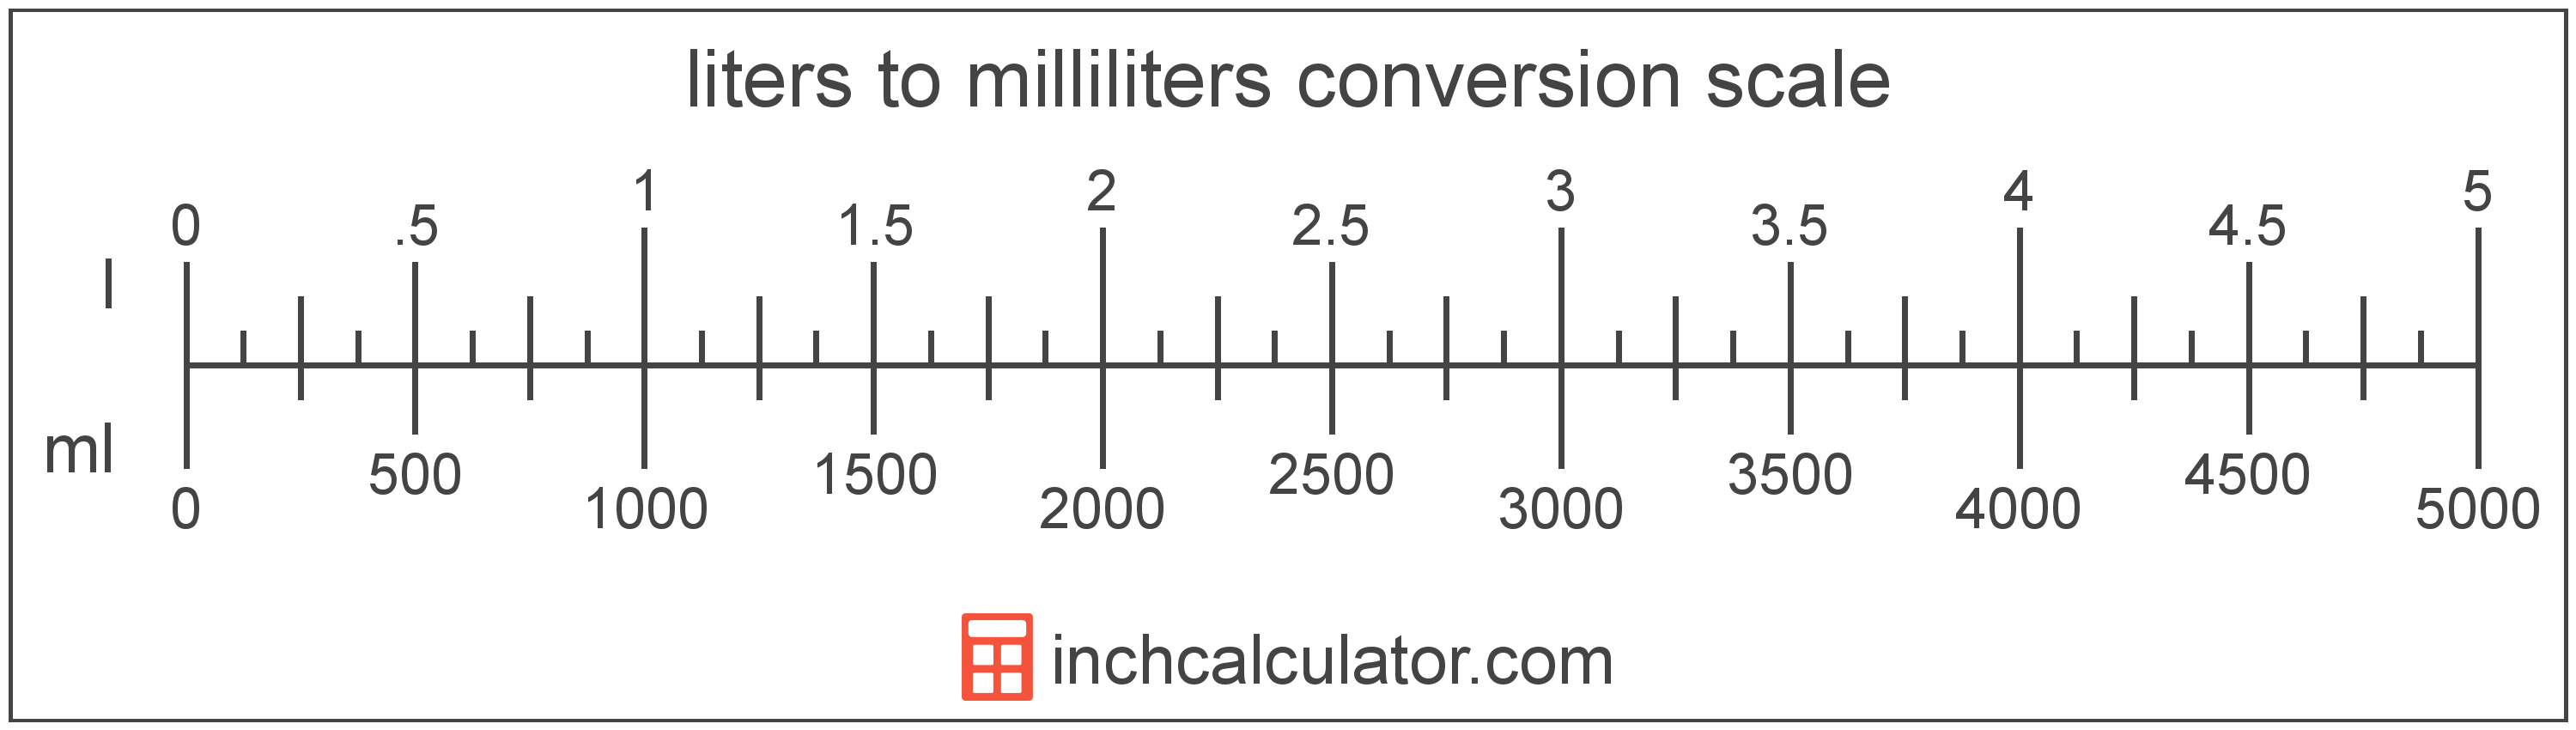 conversion scale showing milliliters and equivalent liters volume values